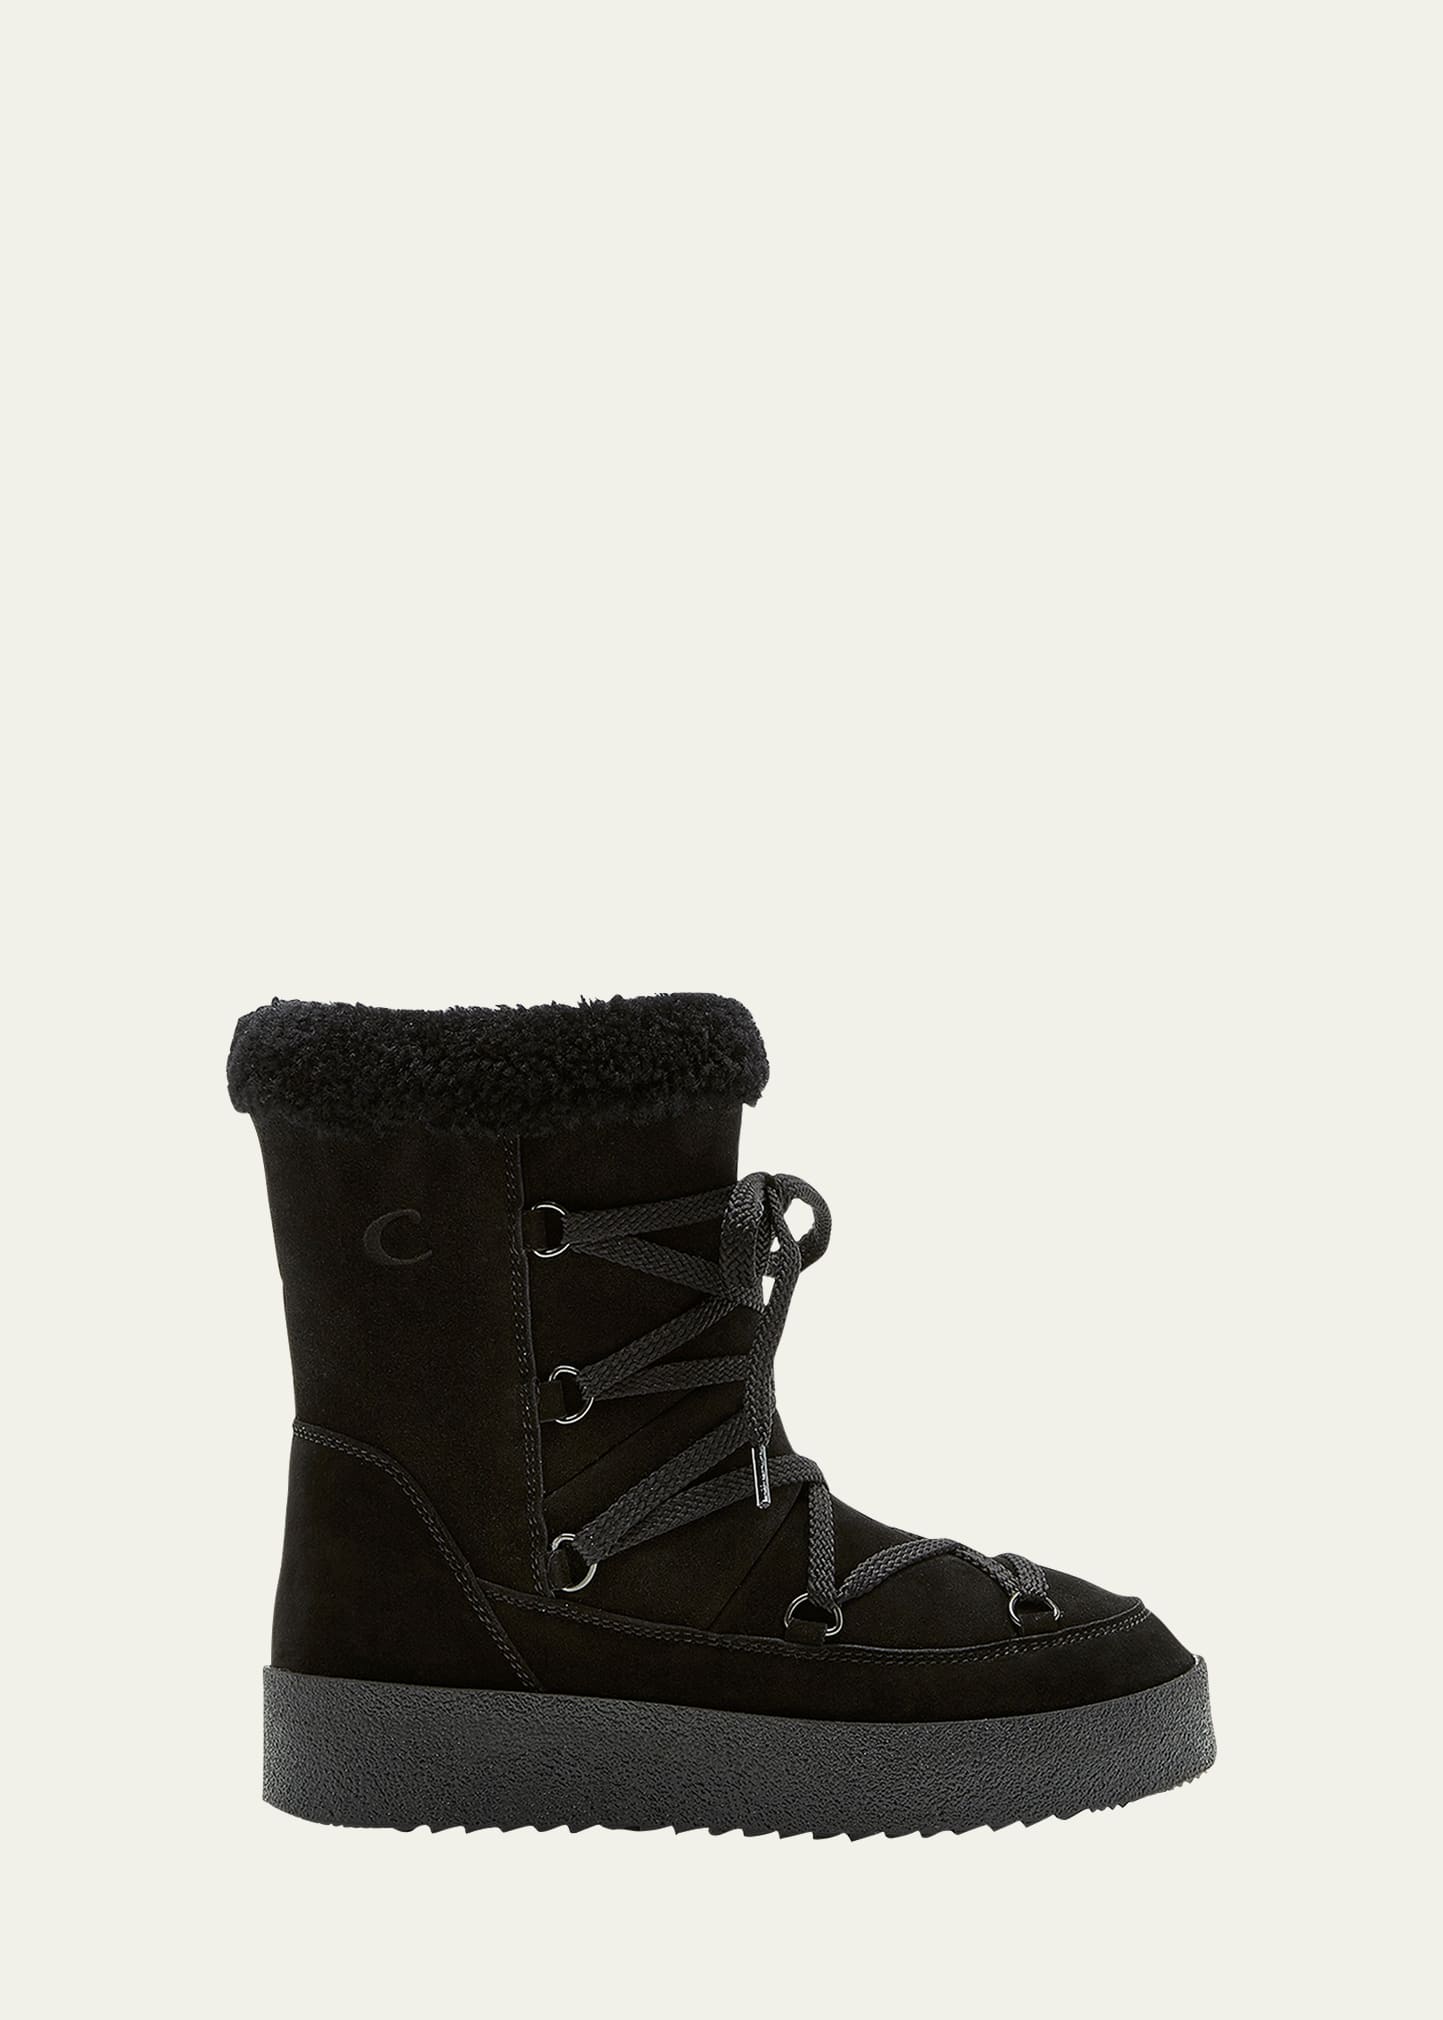 Emery Suede Shearling Snow Boots